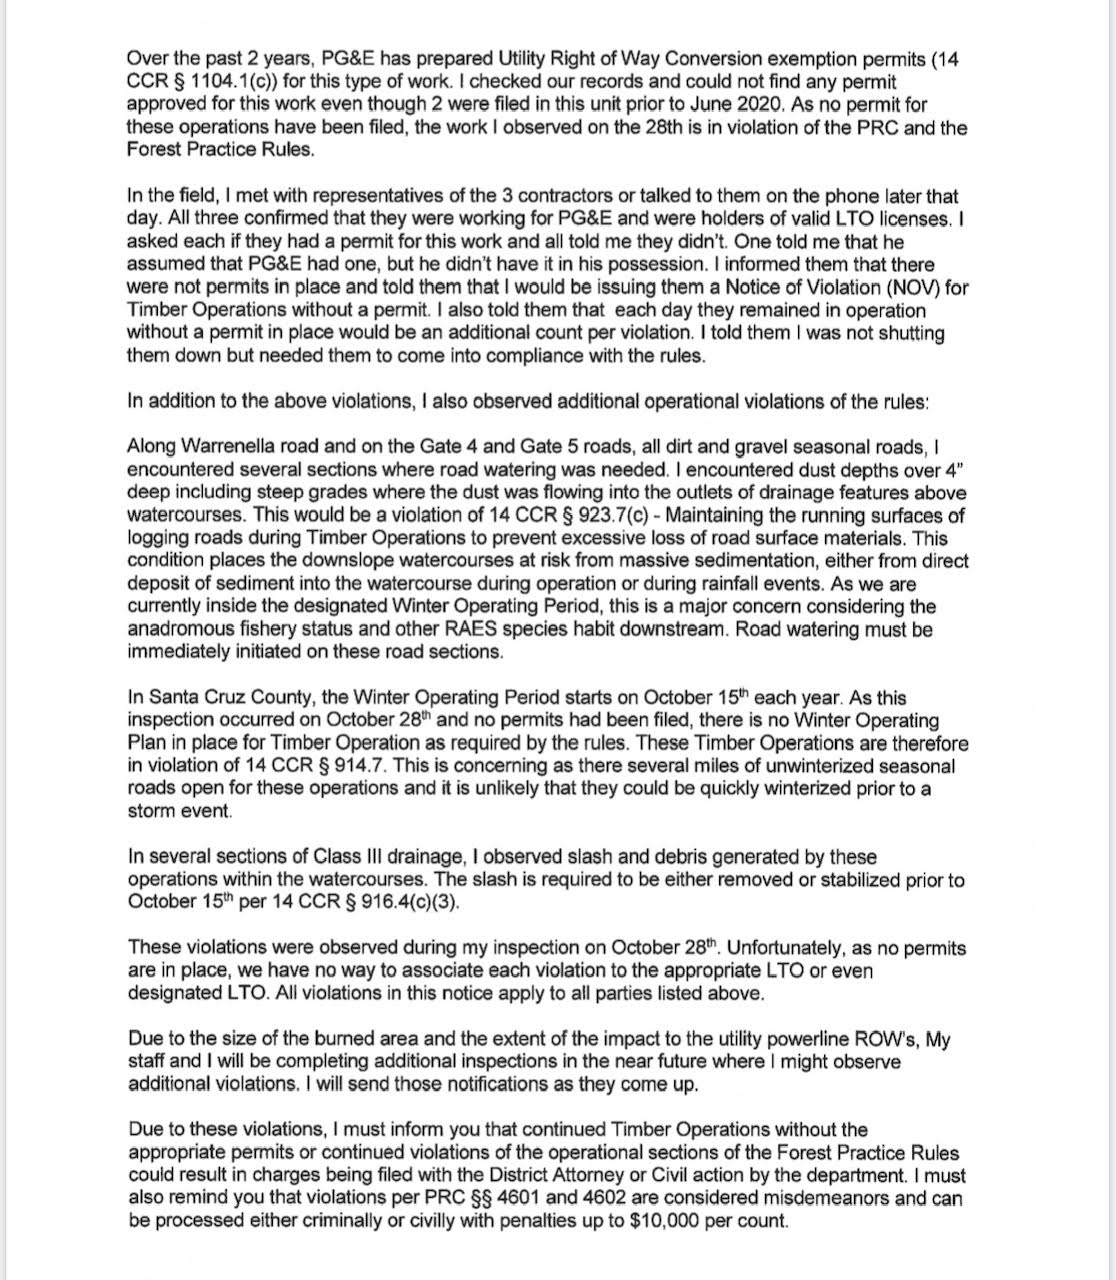 Cal Fire letter to PG&E